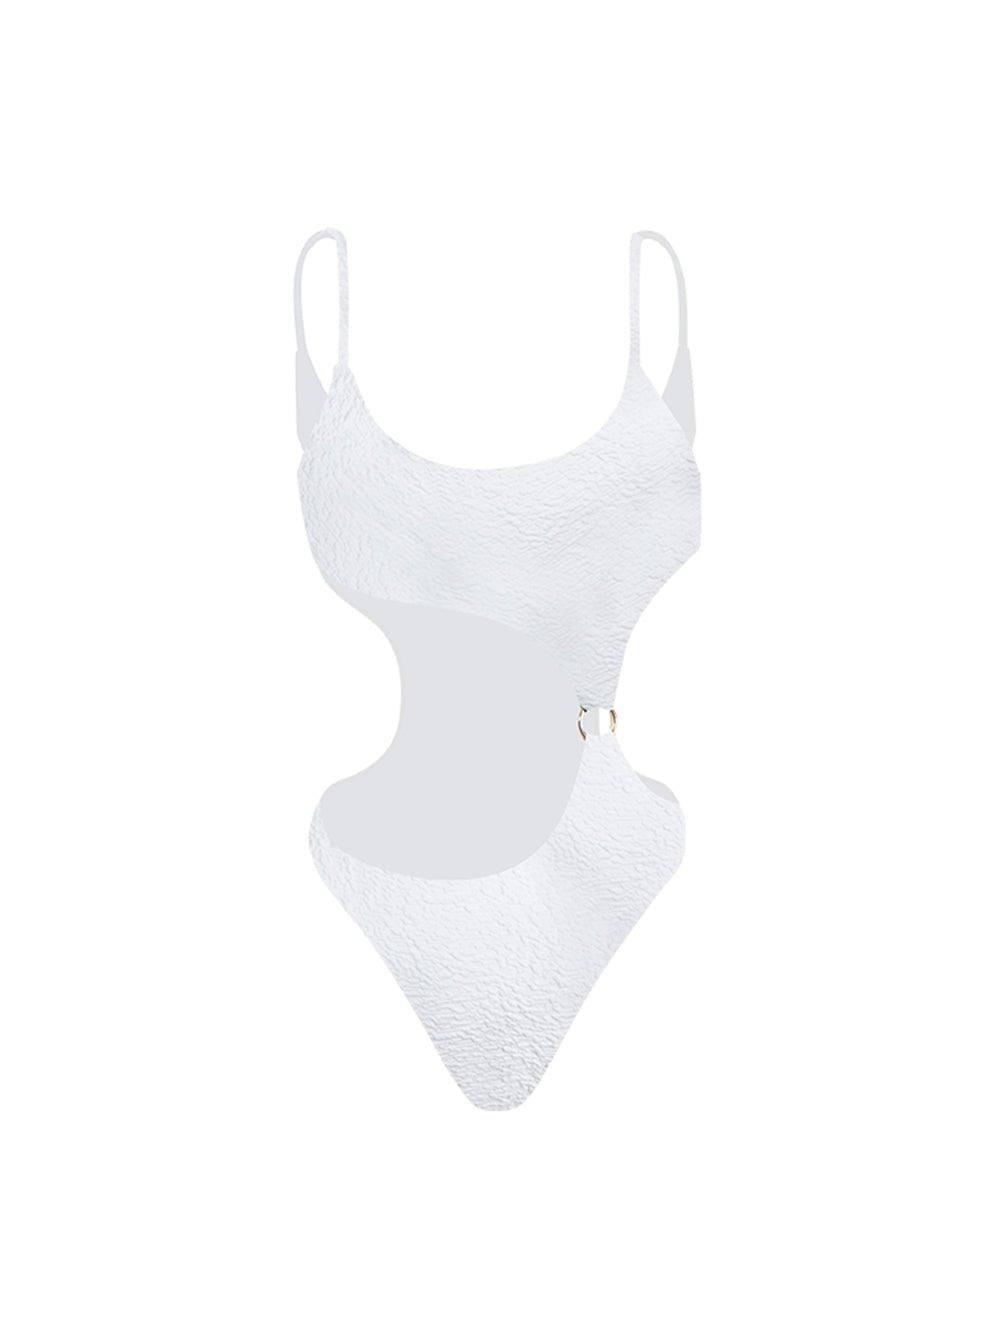 Jacquard Irregular Cut Out One Piece Swimsuit - White - OCEAN MYSTERY